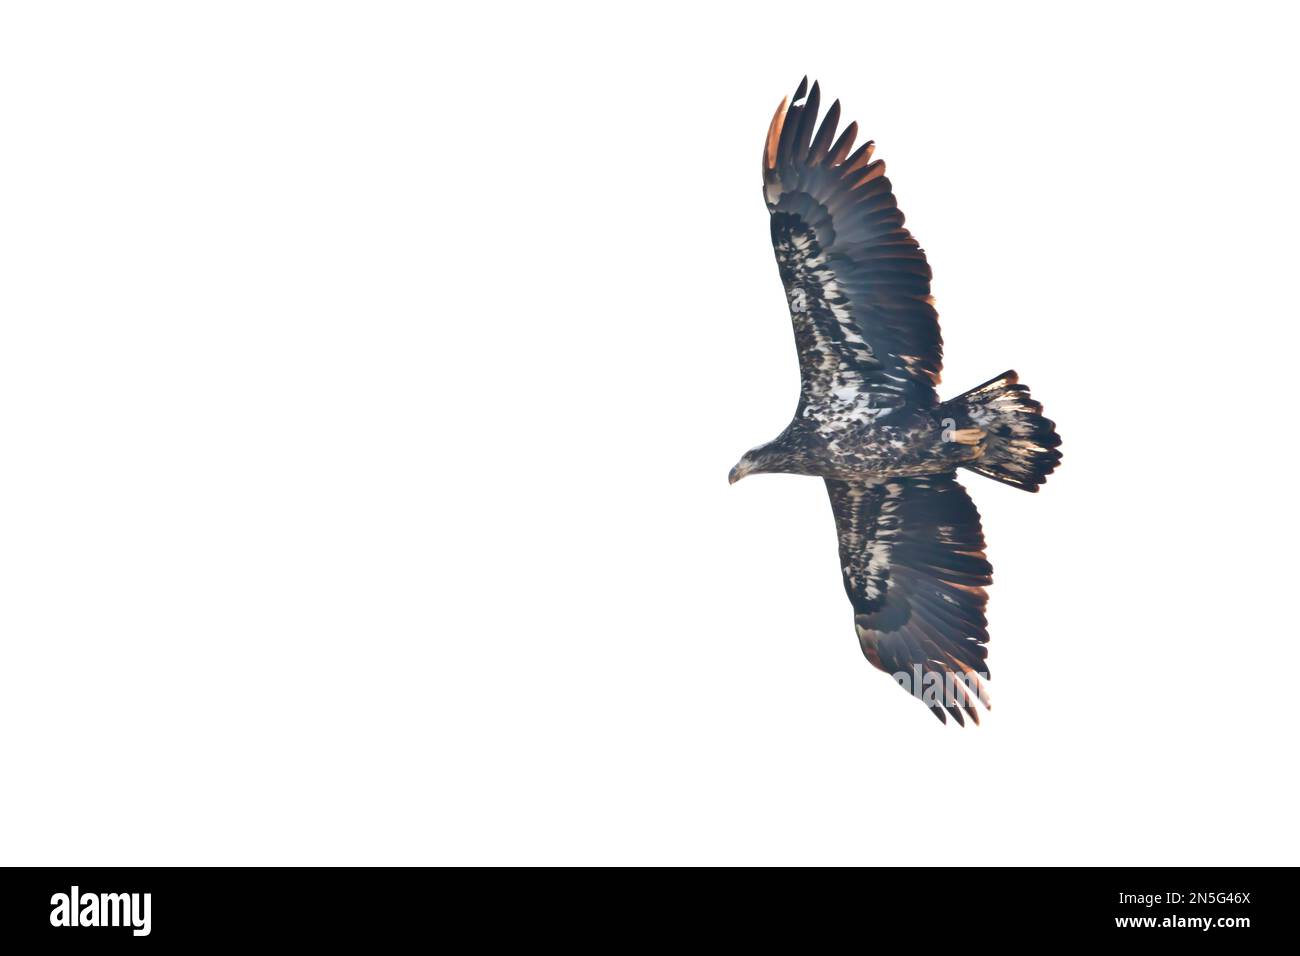 Juvenile bald eagle in flight in Davenport, Iowa on a winter day Stock Photo